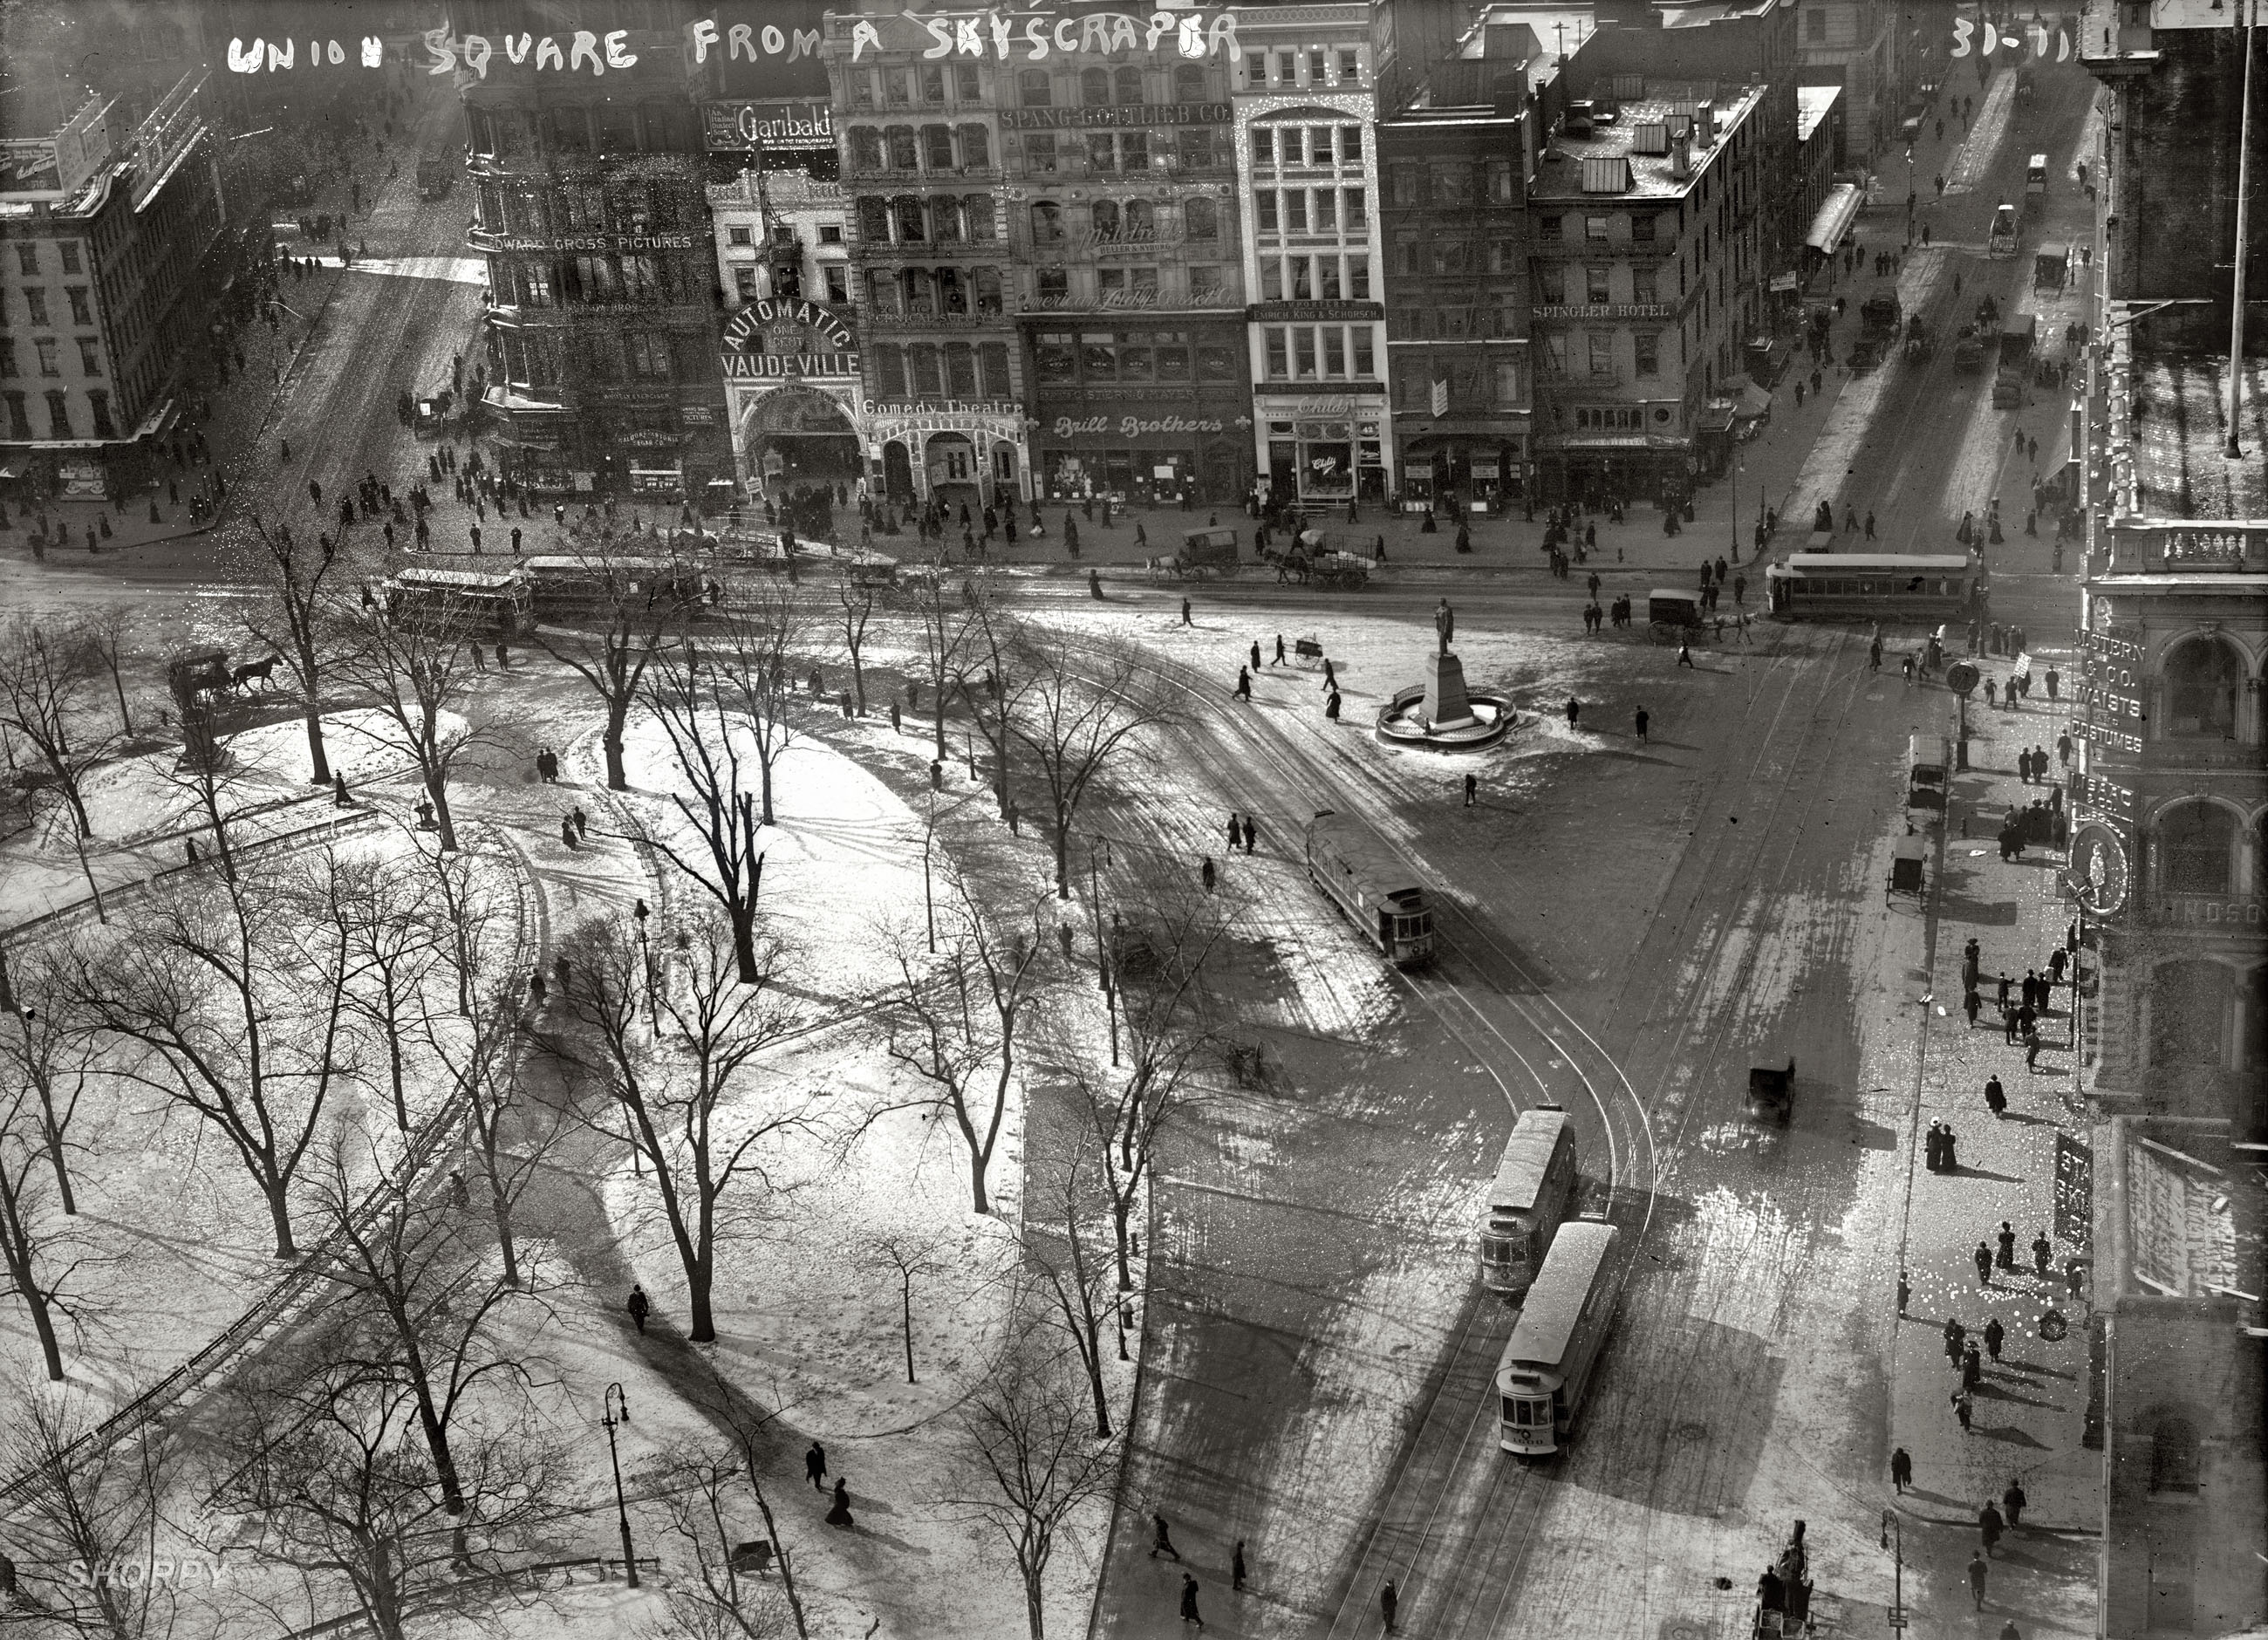 "Union Square from a skyscraper." Winter in New York 100 years ago. A little moldy but full of interesting details like the "Automatic Vaudeville" penny arcade and Brill Bros. store. 5x7 glass negative, George Grantham Bain. View full size.